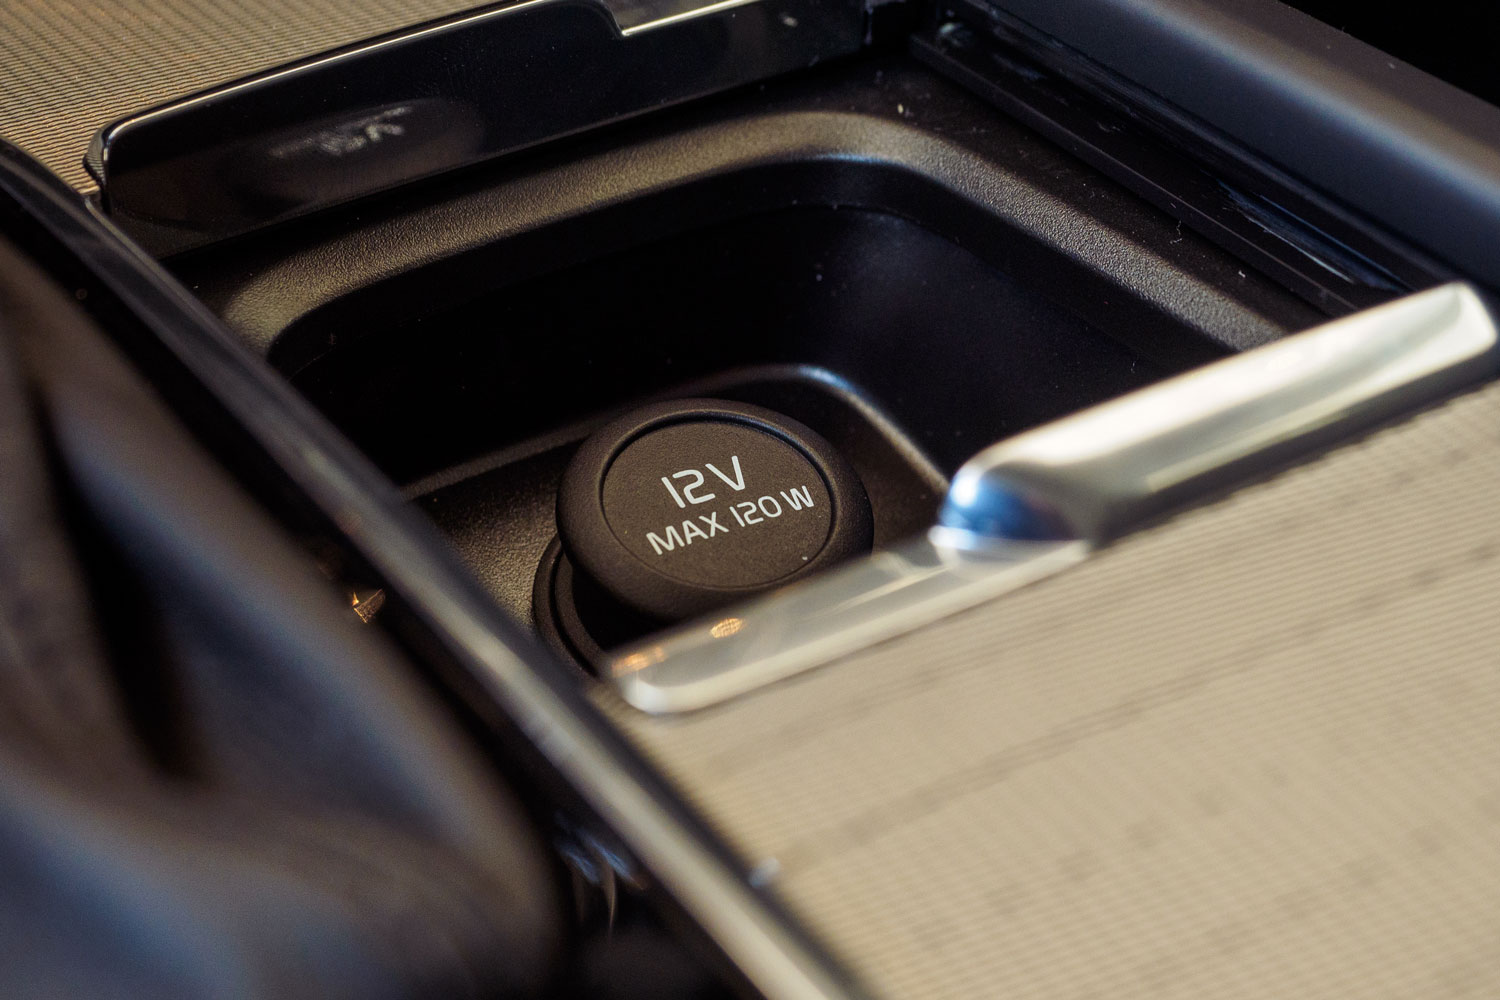 In-Car Outlets: What Do You Use Them For?